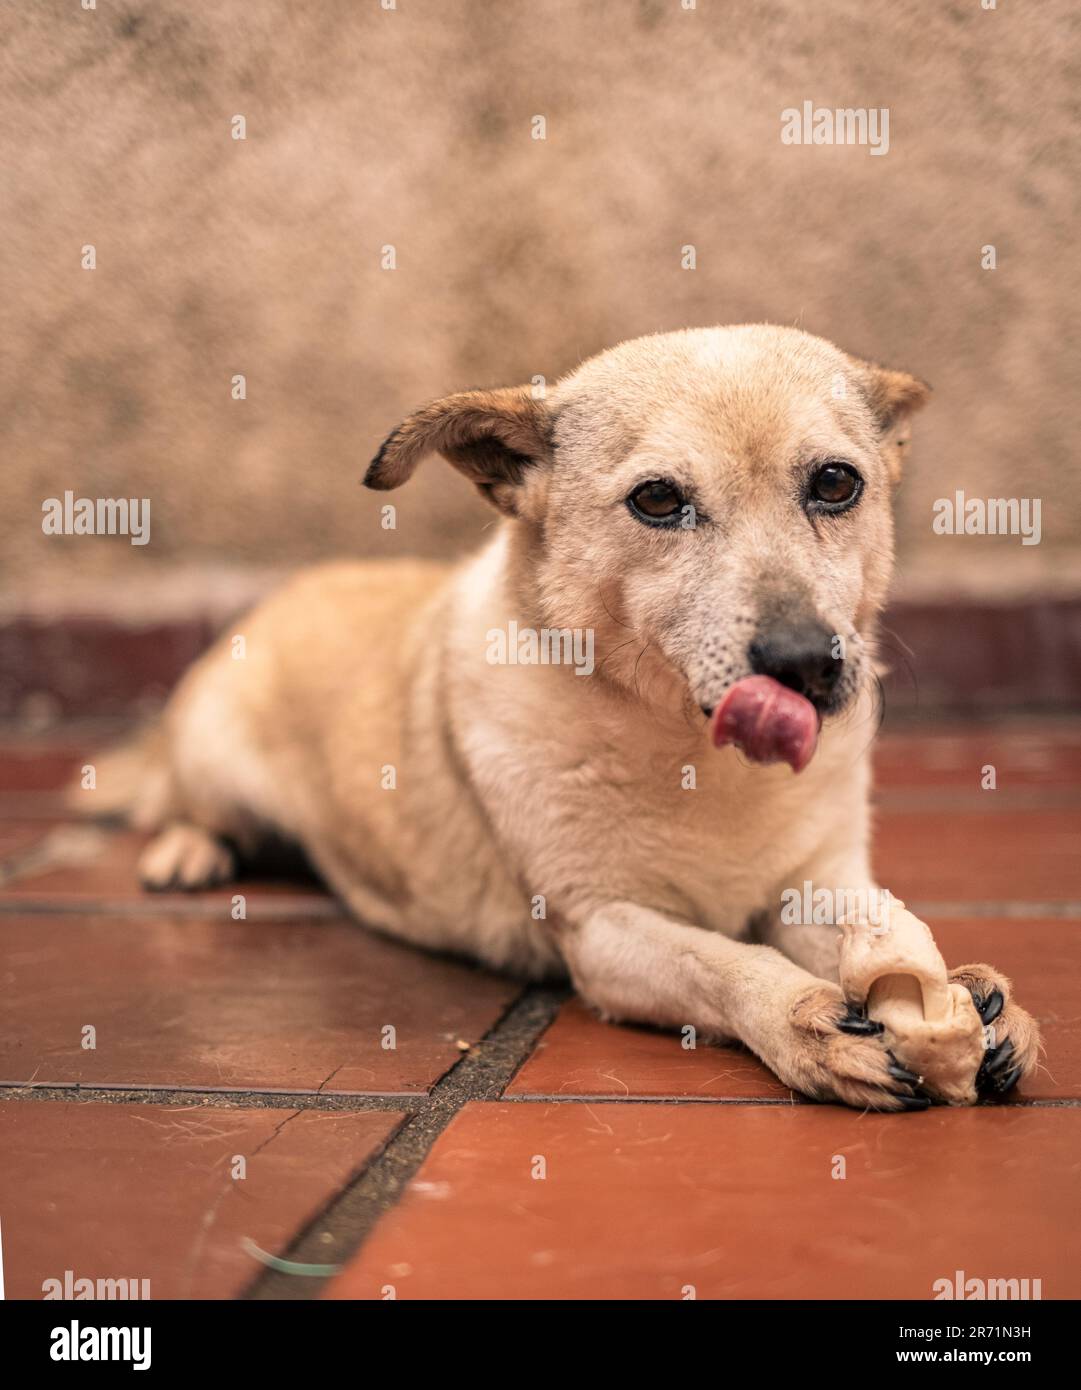 Enchanting Canine Charisma: A Docile, Friendly, and Captivating Dog Radiating Playfulness and Irresistible Affection Stock Photo